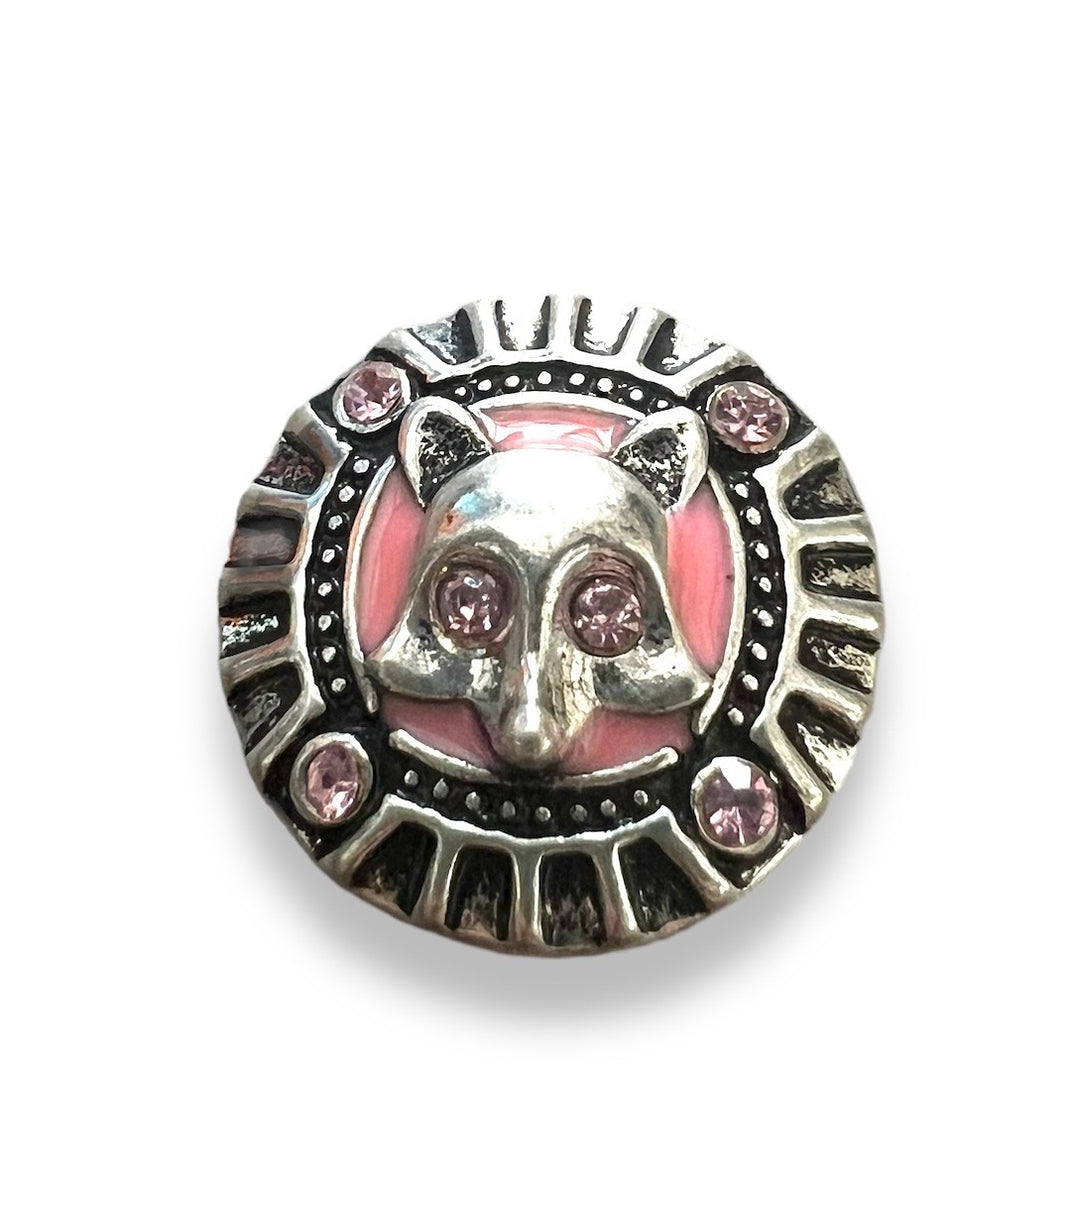 Pink Enamel and Rhinestone Antique Silver Plated Fox 20MM Snap Jewelry Charm